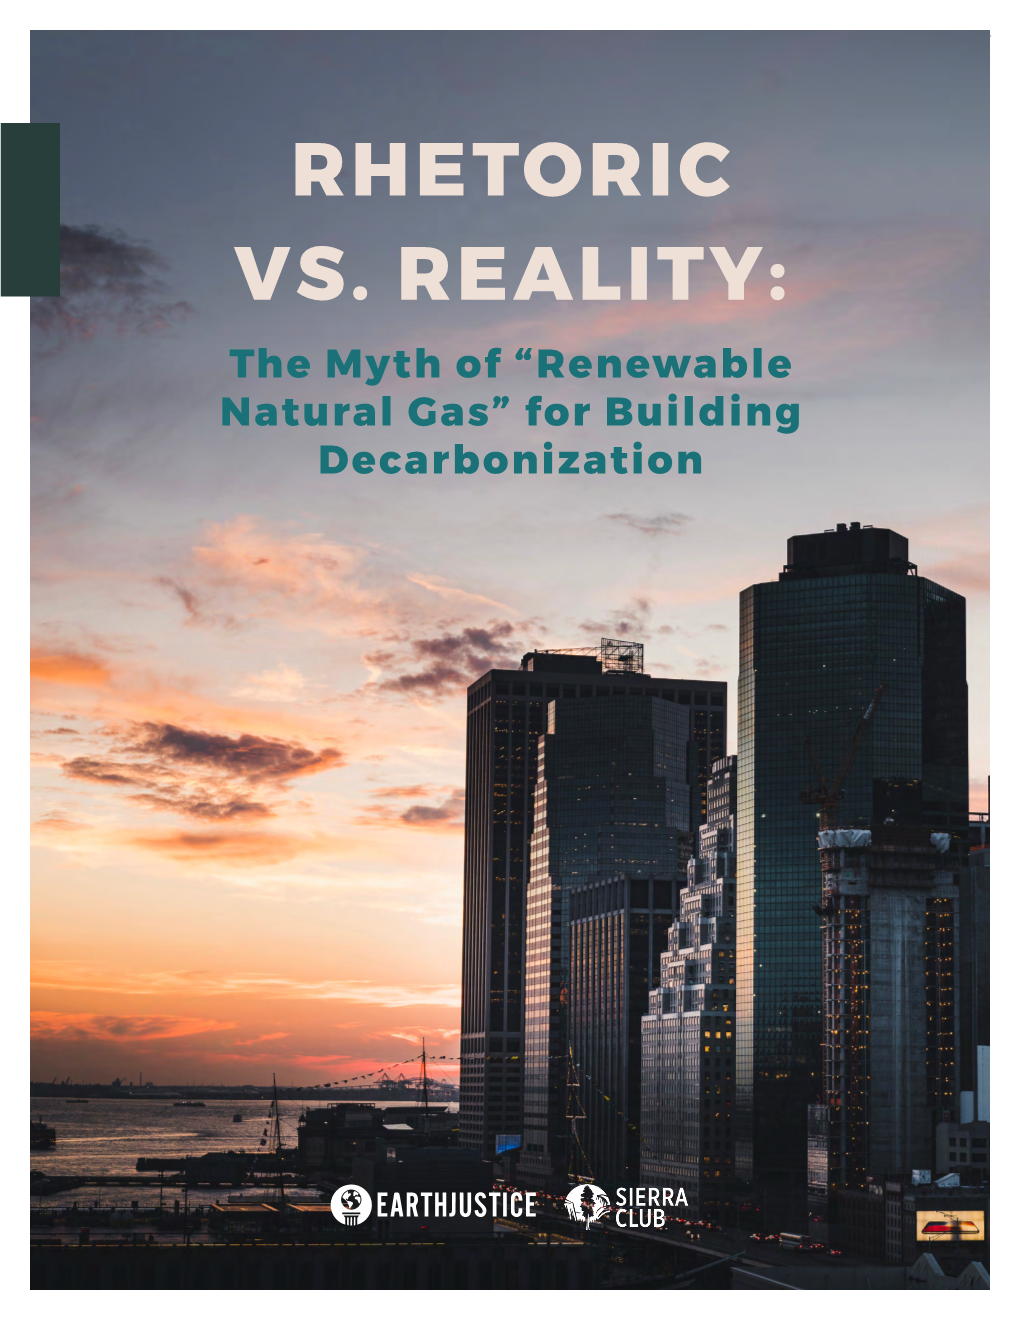 RHETORIC VS. REALITY: the Myth of “Renewable Natural Gas” for Building Decarbonization